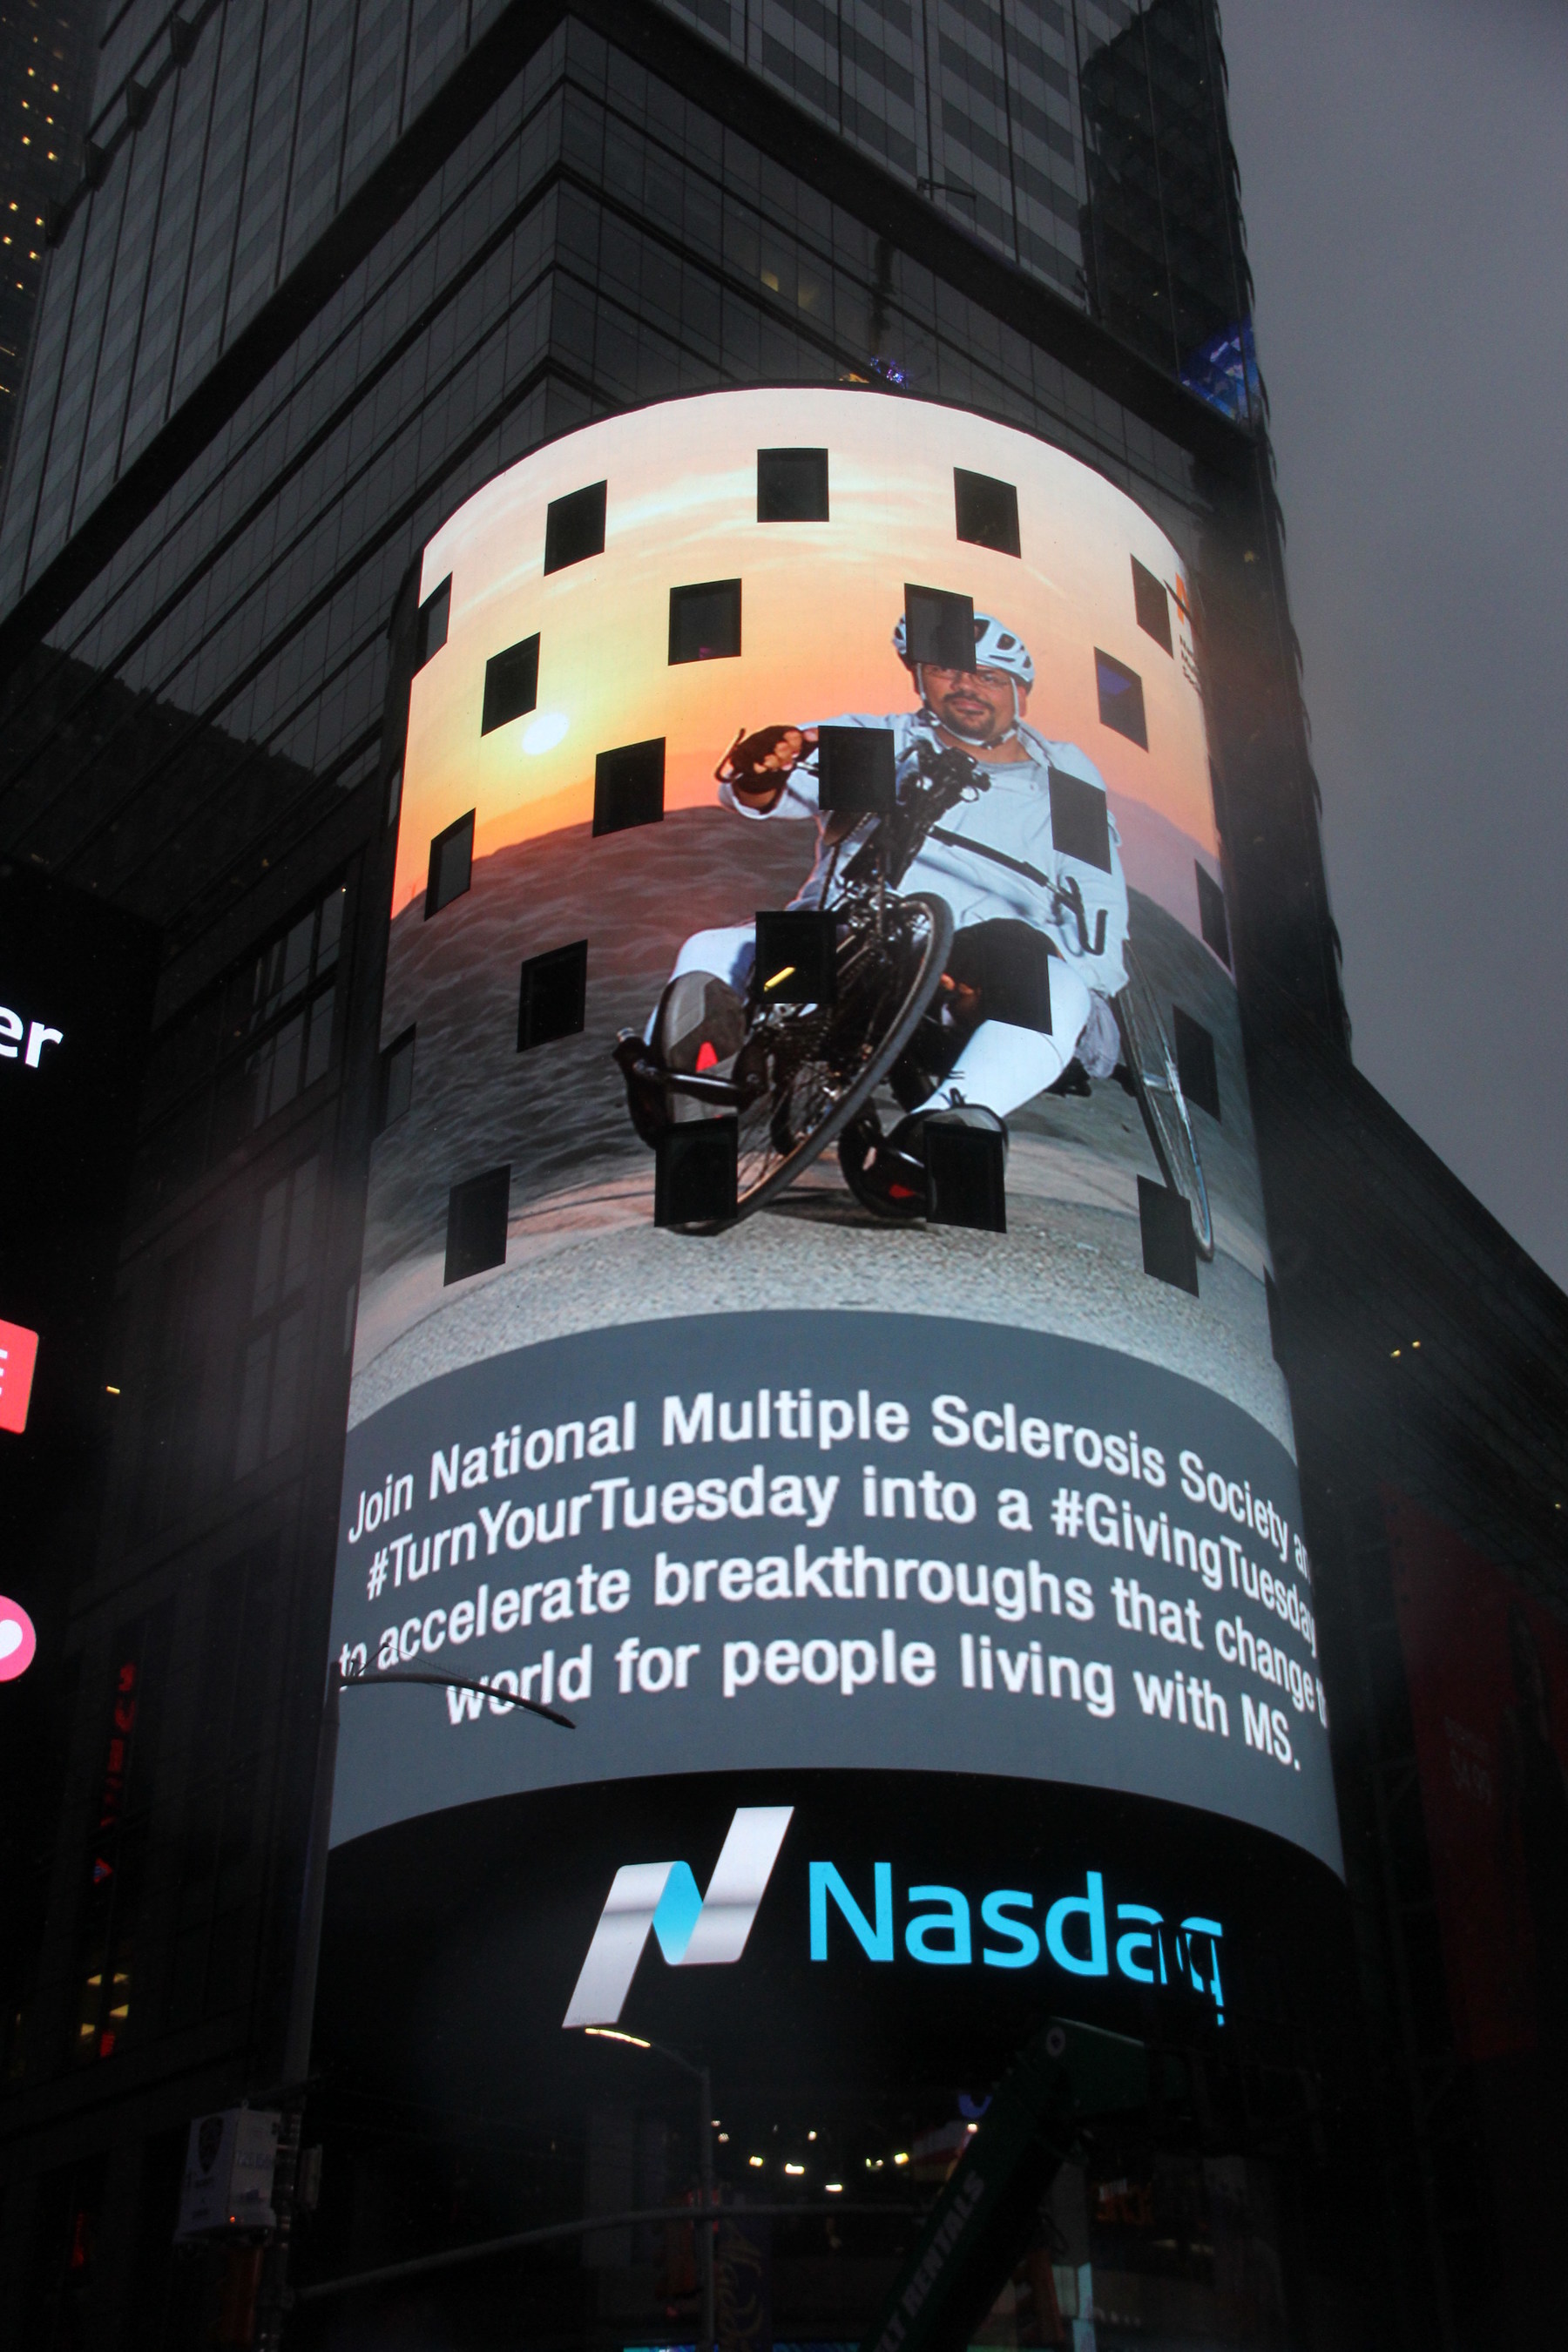 Blackbaud is takes over the Nasdaq tower at Times Square to promote what its customers are doing for #GivingTuesday. Join National Multiple Sclerosis Society this #GivingTuesday to accelerate breakthroughs that change the world for people living with MS.